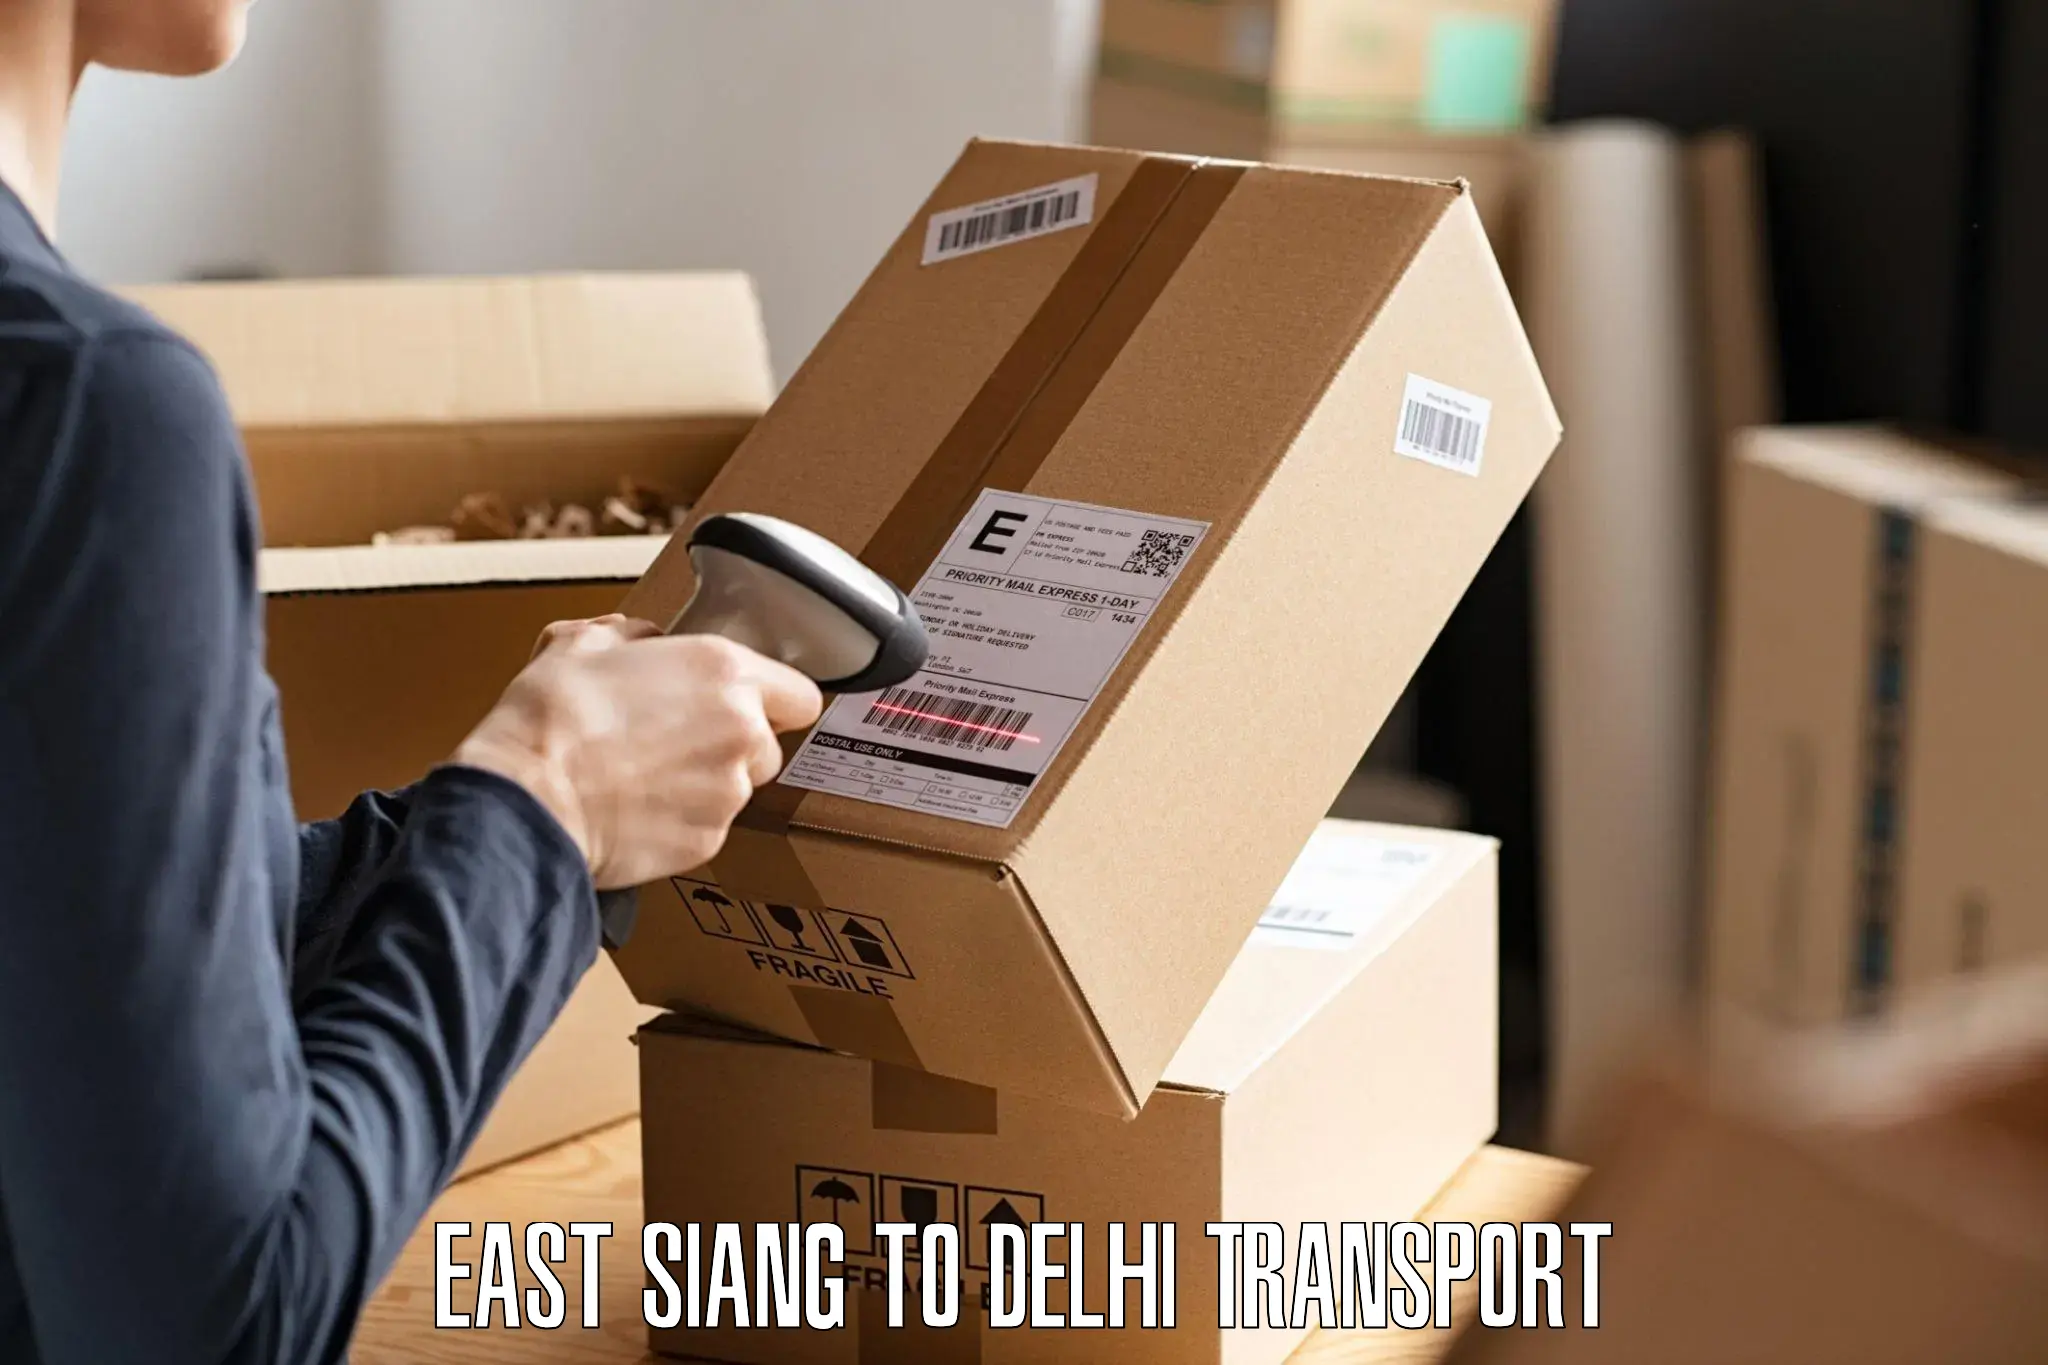 Container transport service East Siang to Delhi